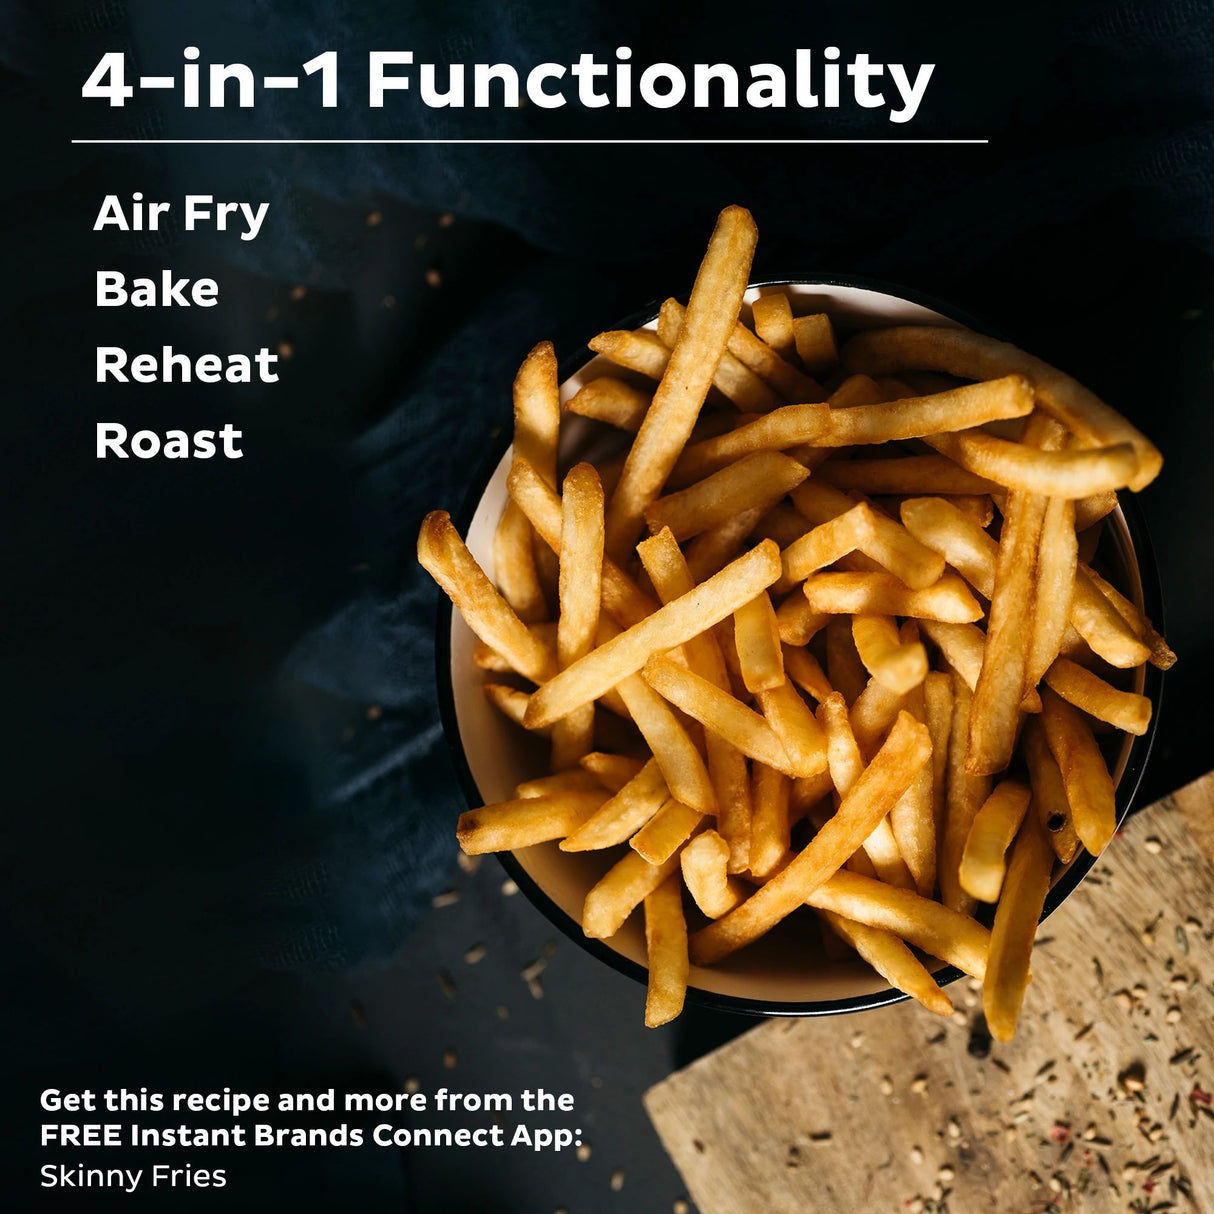  Instant™ Vortex™ Mini 2-quart Air Fryer, Black with text 4 in 1 Functionality